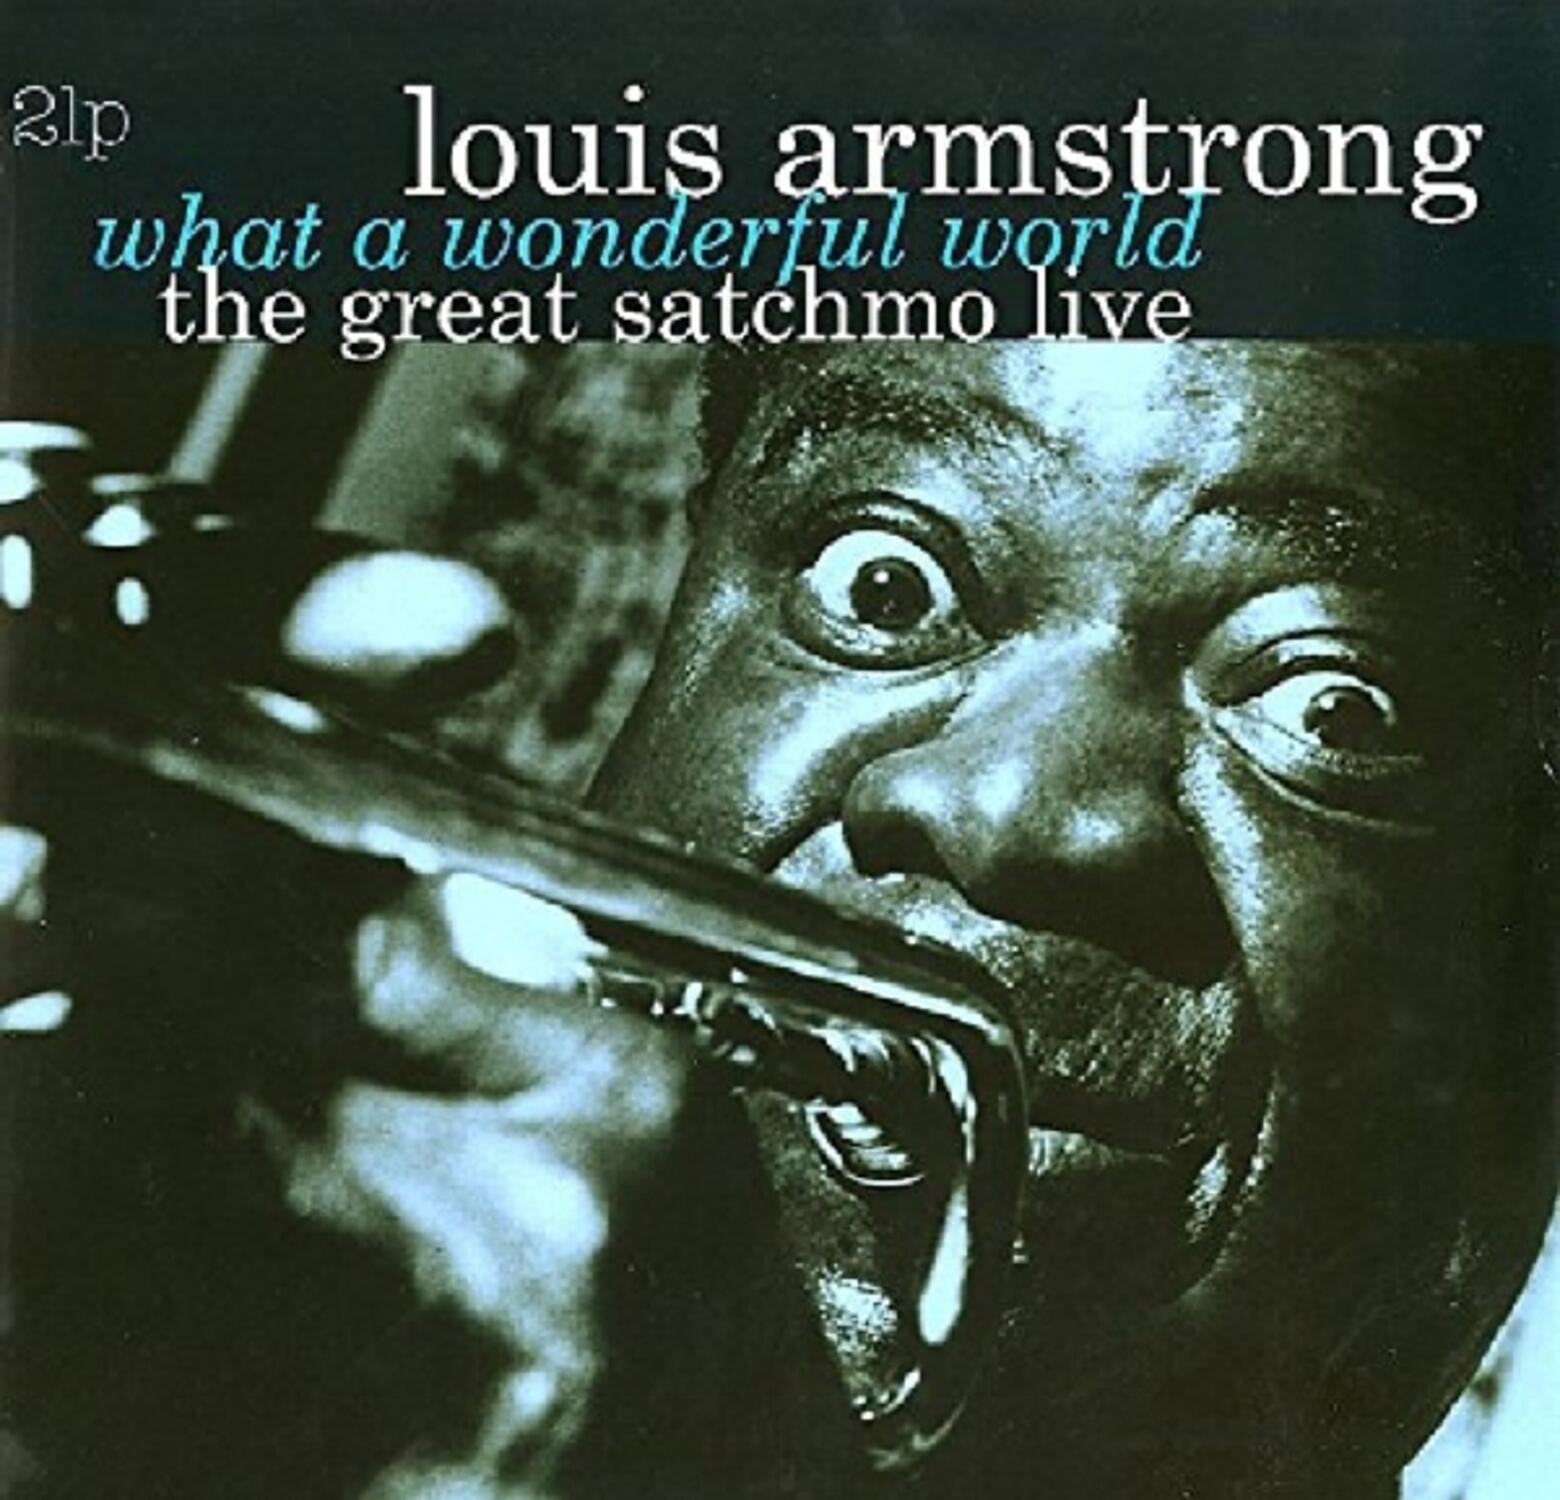 What a Wonderful World. The Great Satchmo - Louis Armstrong - Vinile | IBS